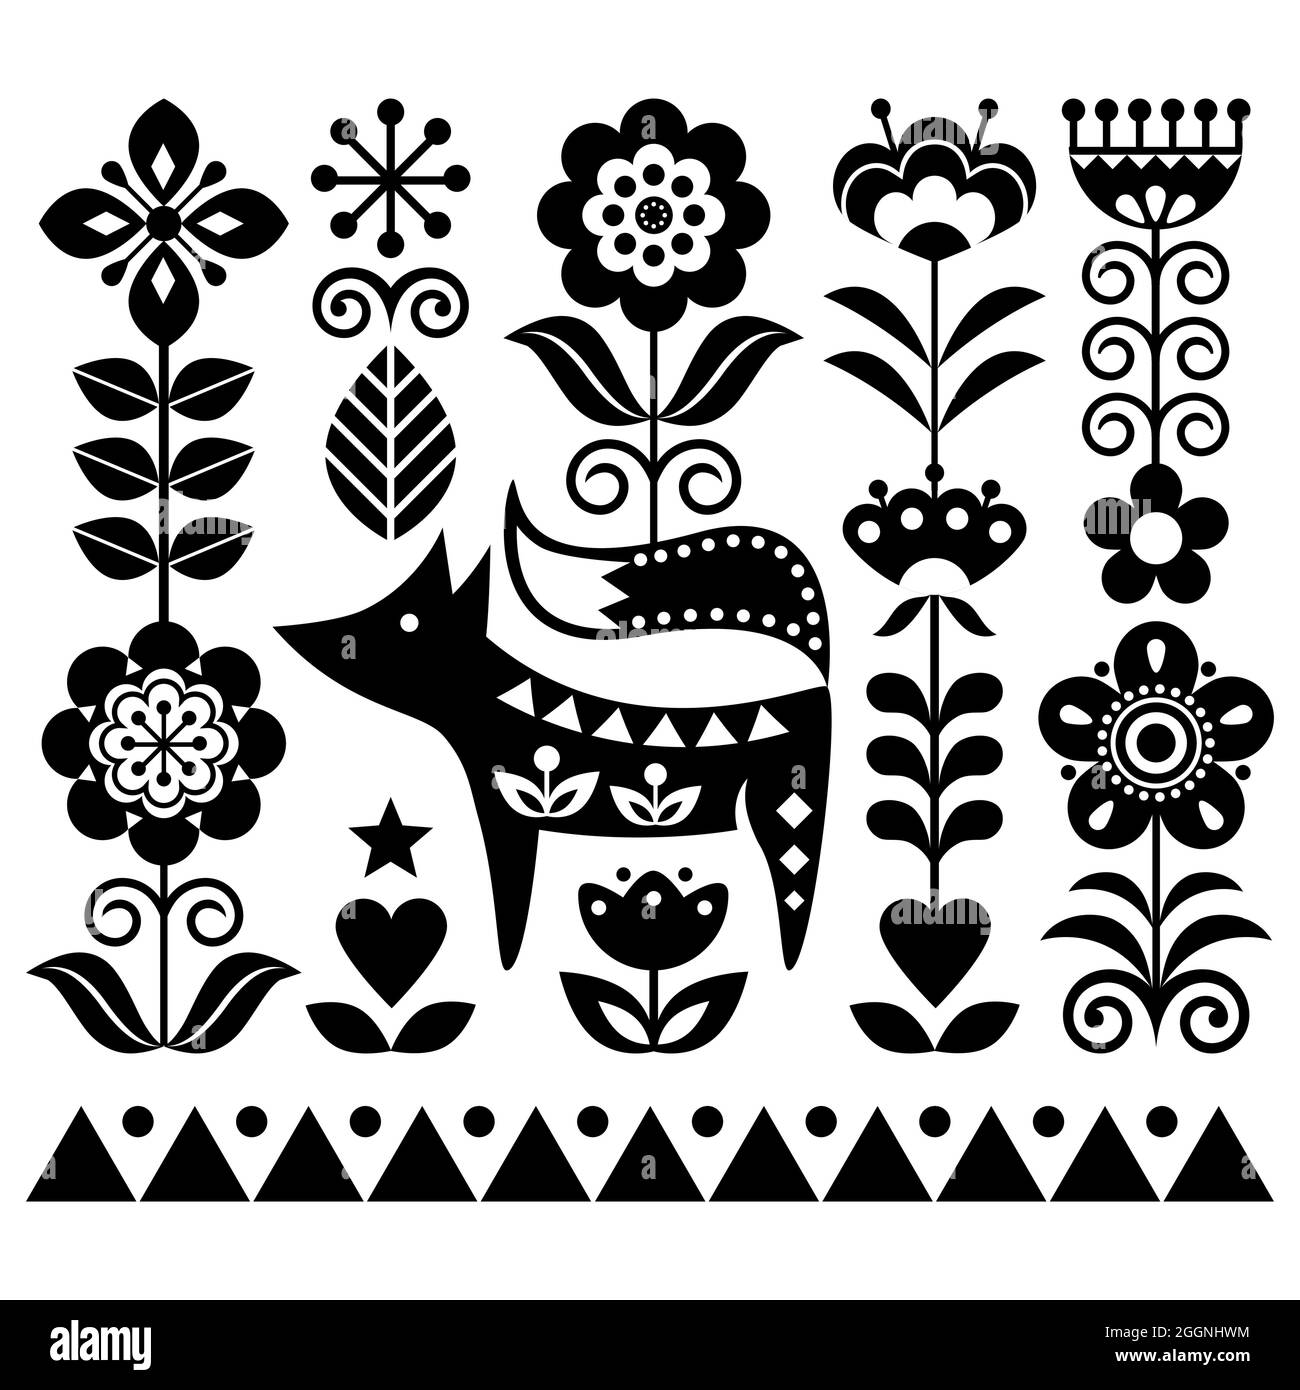 Scandinavian cute folk art vector pattern with flowers and fox, black and white floral greeting card or invitation inspired by traditional embroidery Stock Vector